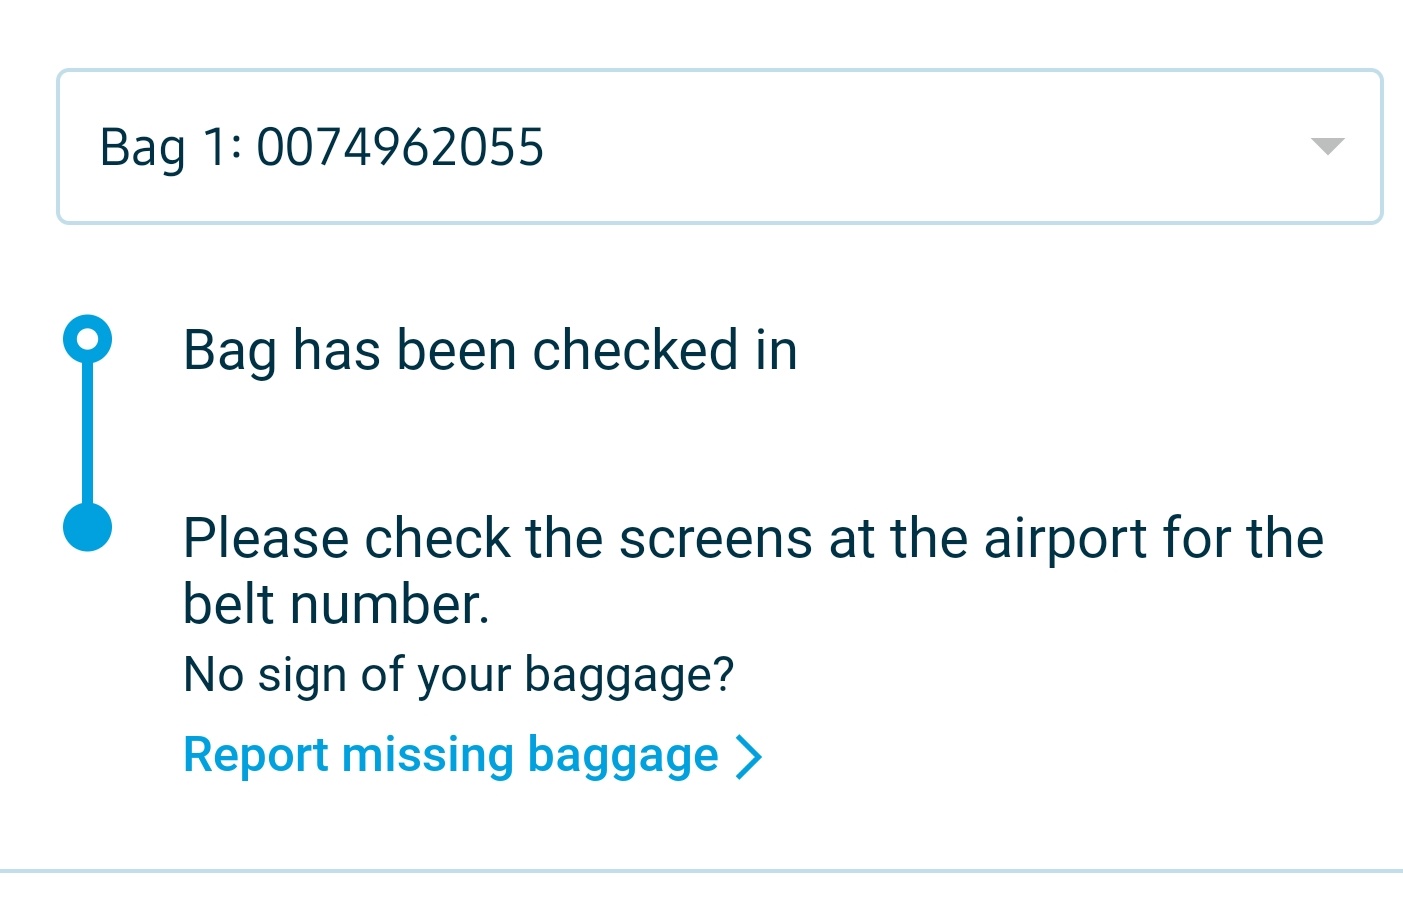 National exaggerate Breeze تويتر \ KLM على تويتر: "@TCHWRX Could you please elaborate your concern  about your baggage so I can inform you accordingly?"